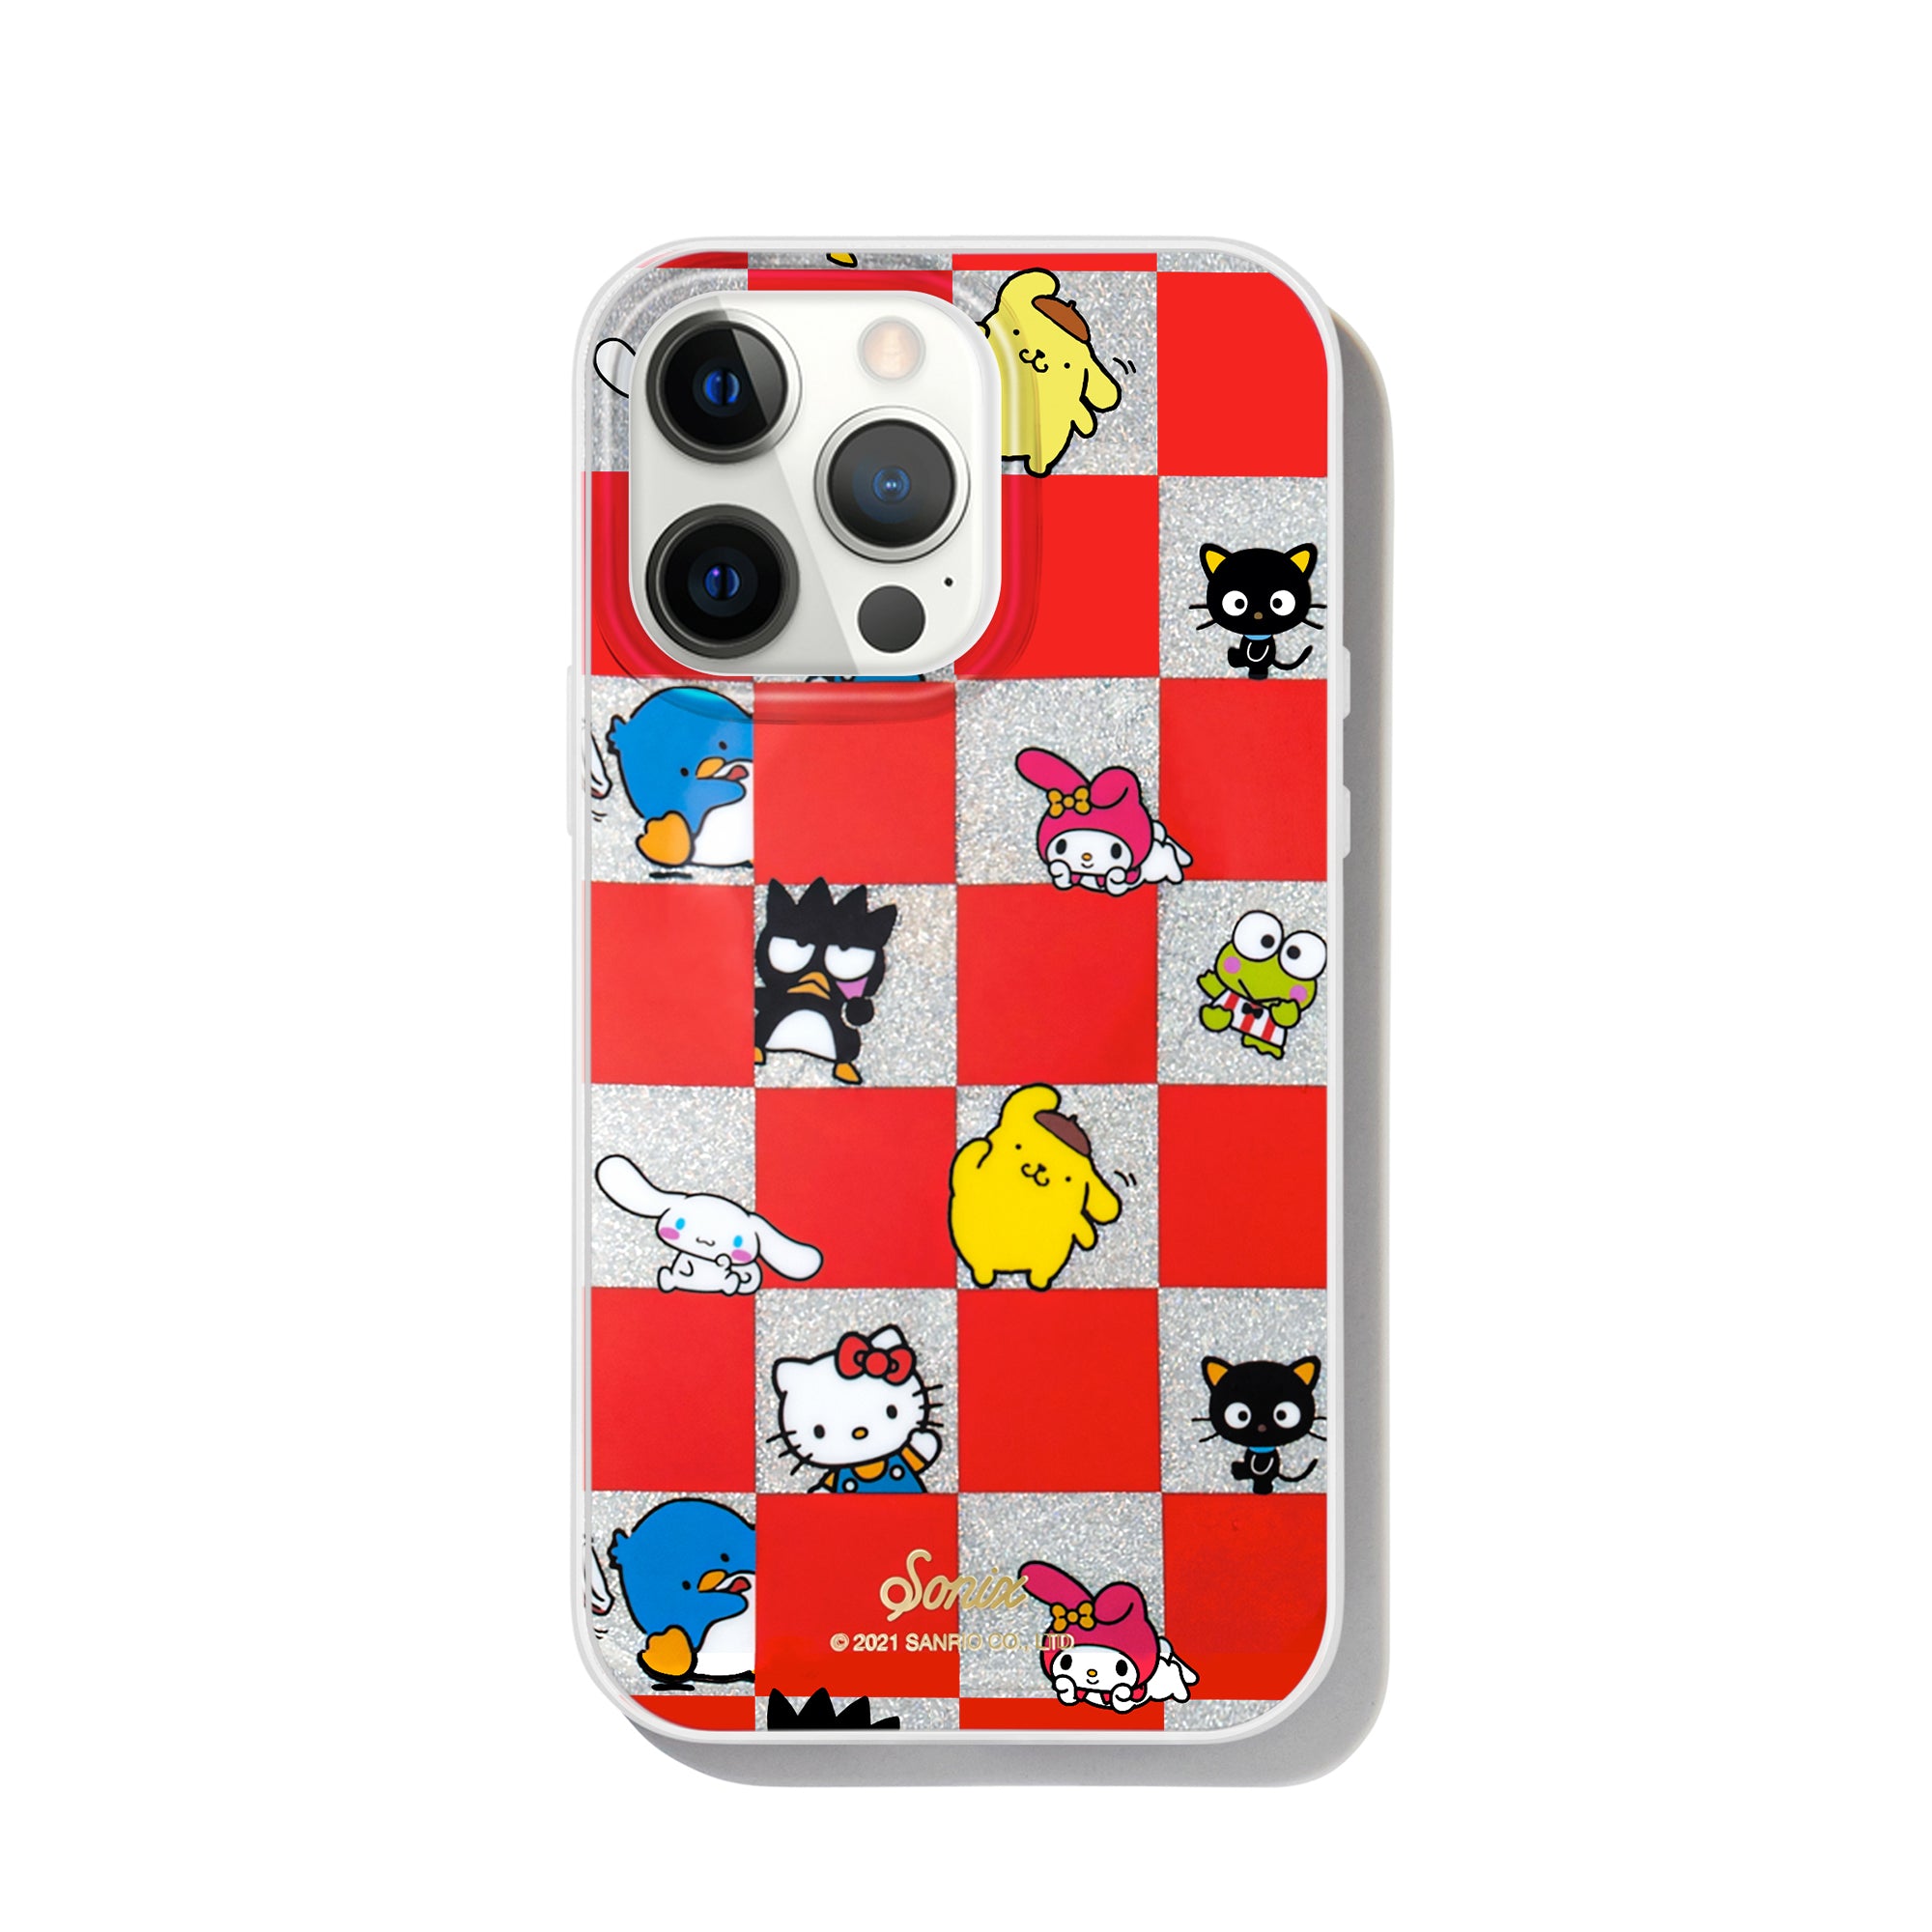 13 pro case with